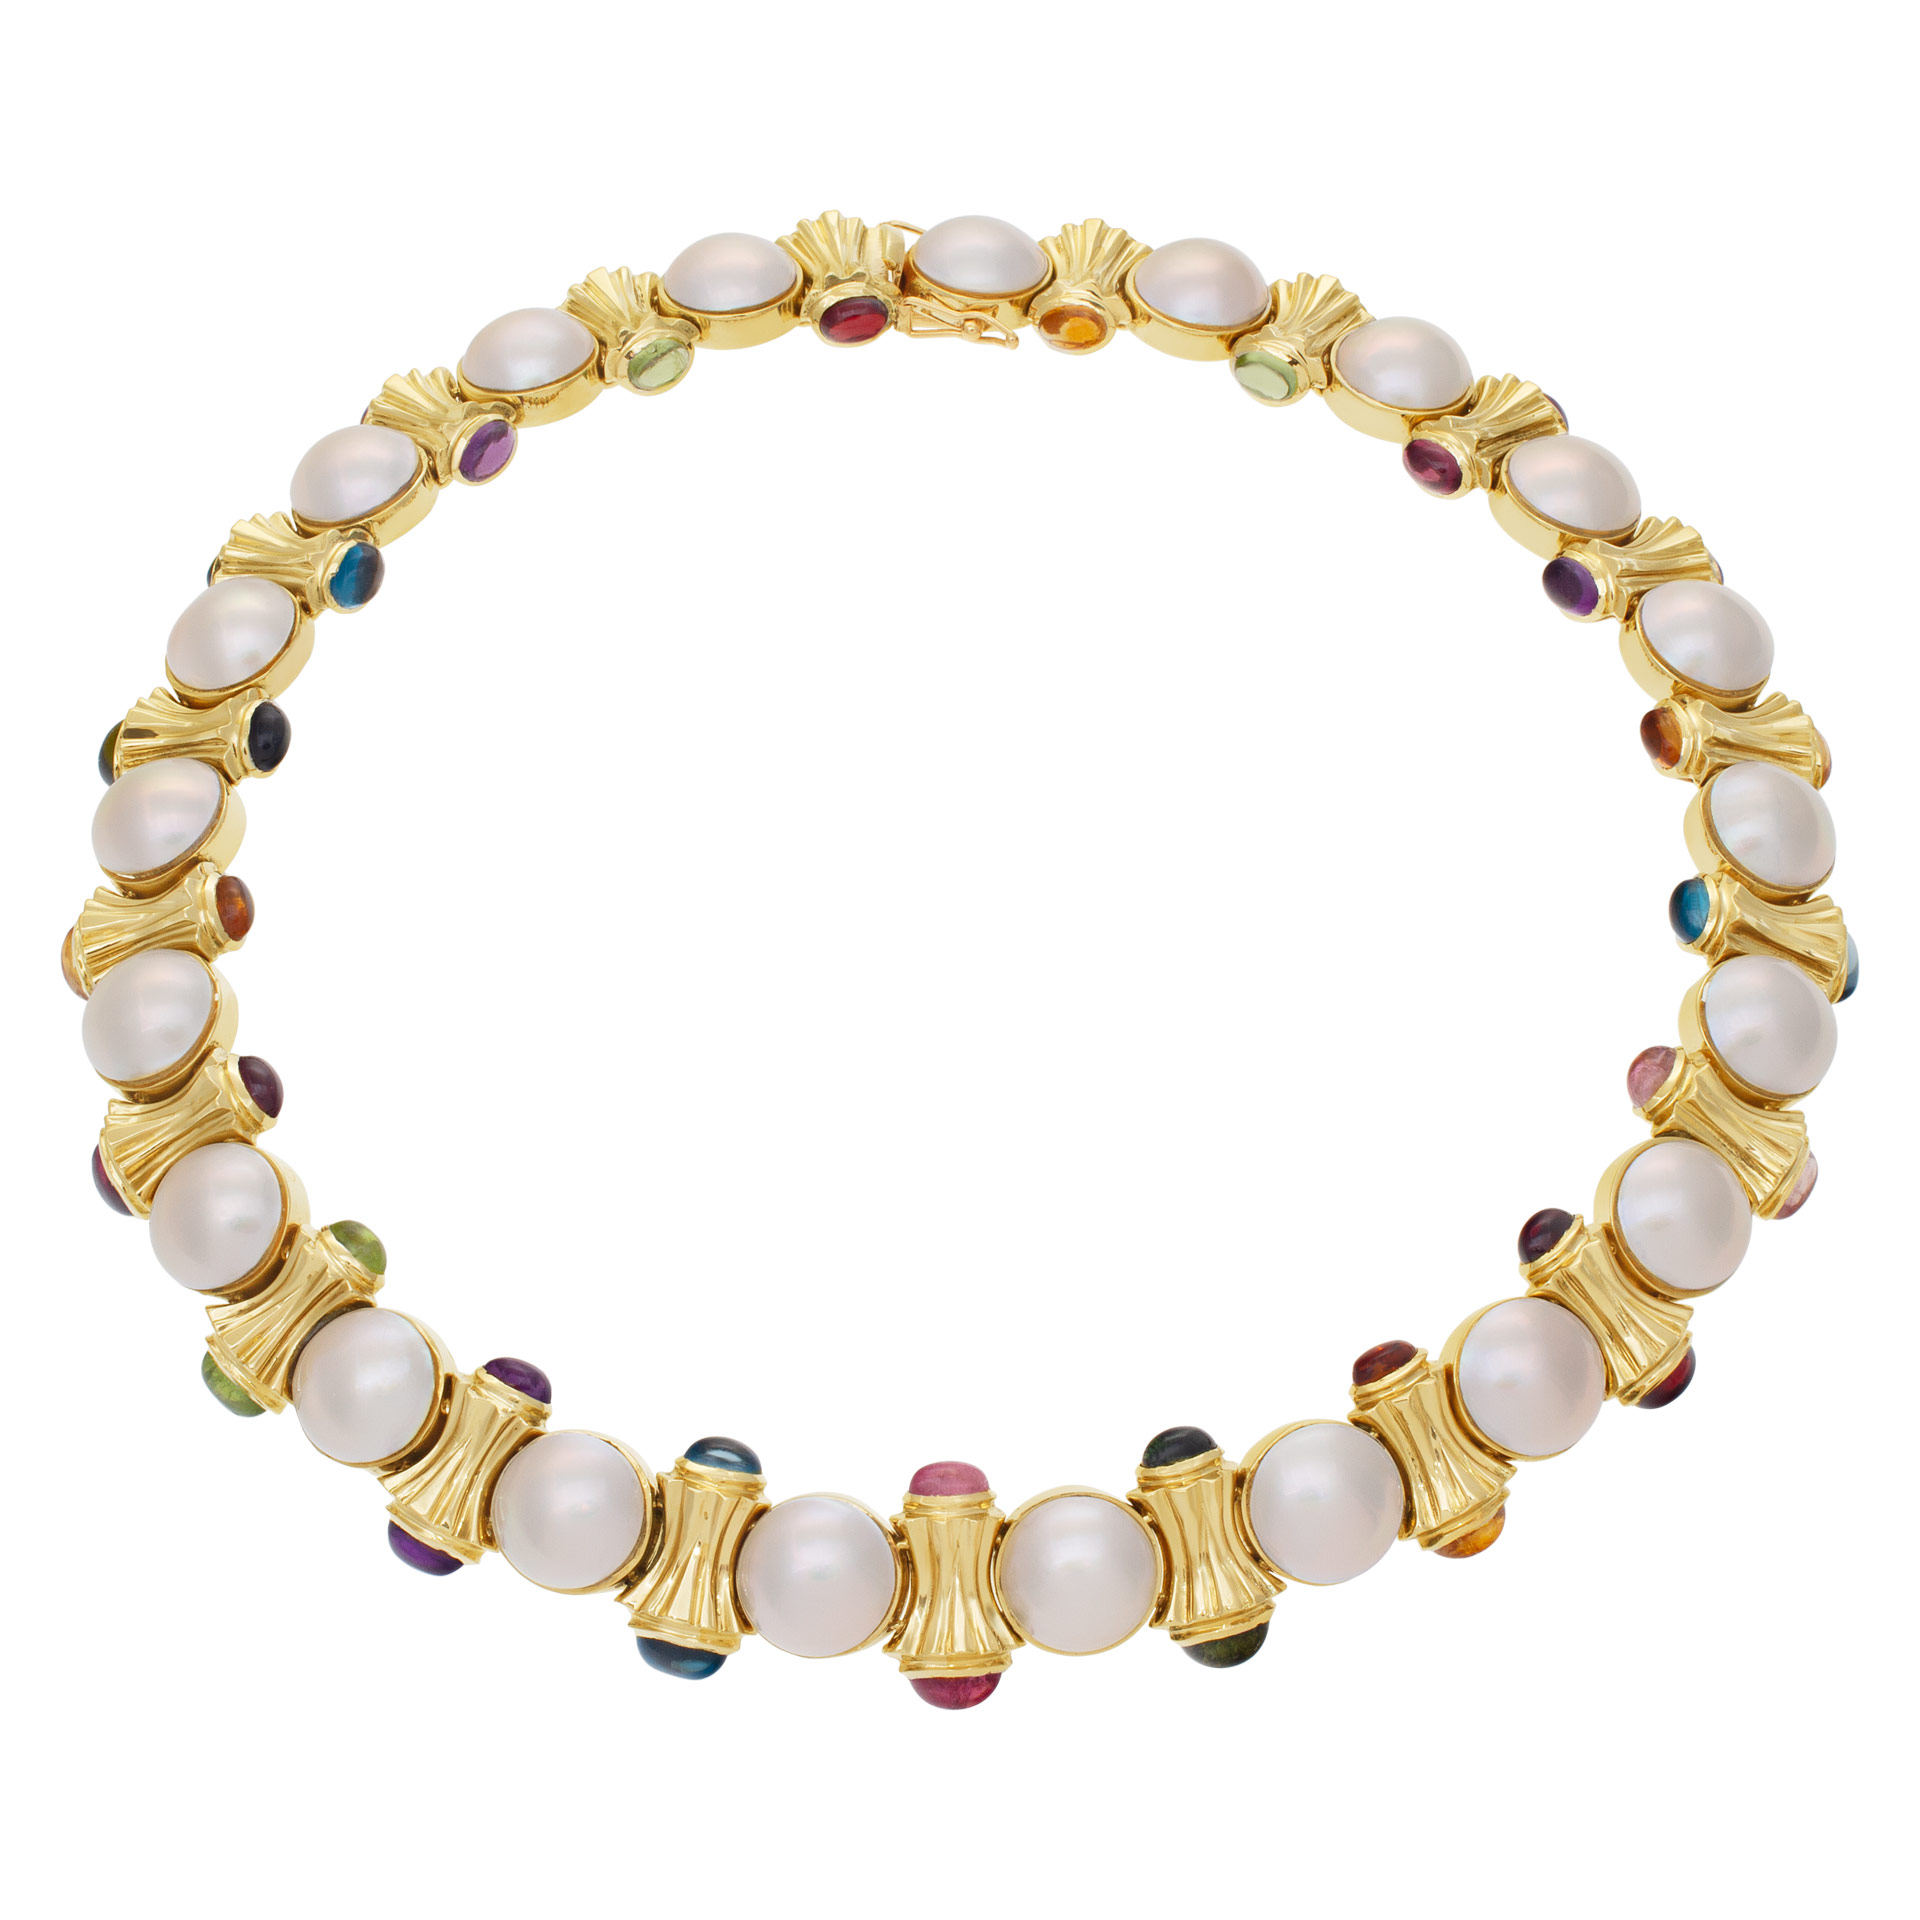 Colorful 14k necklace with 11.5mm Mobe pearls and cabochon stone